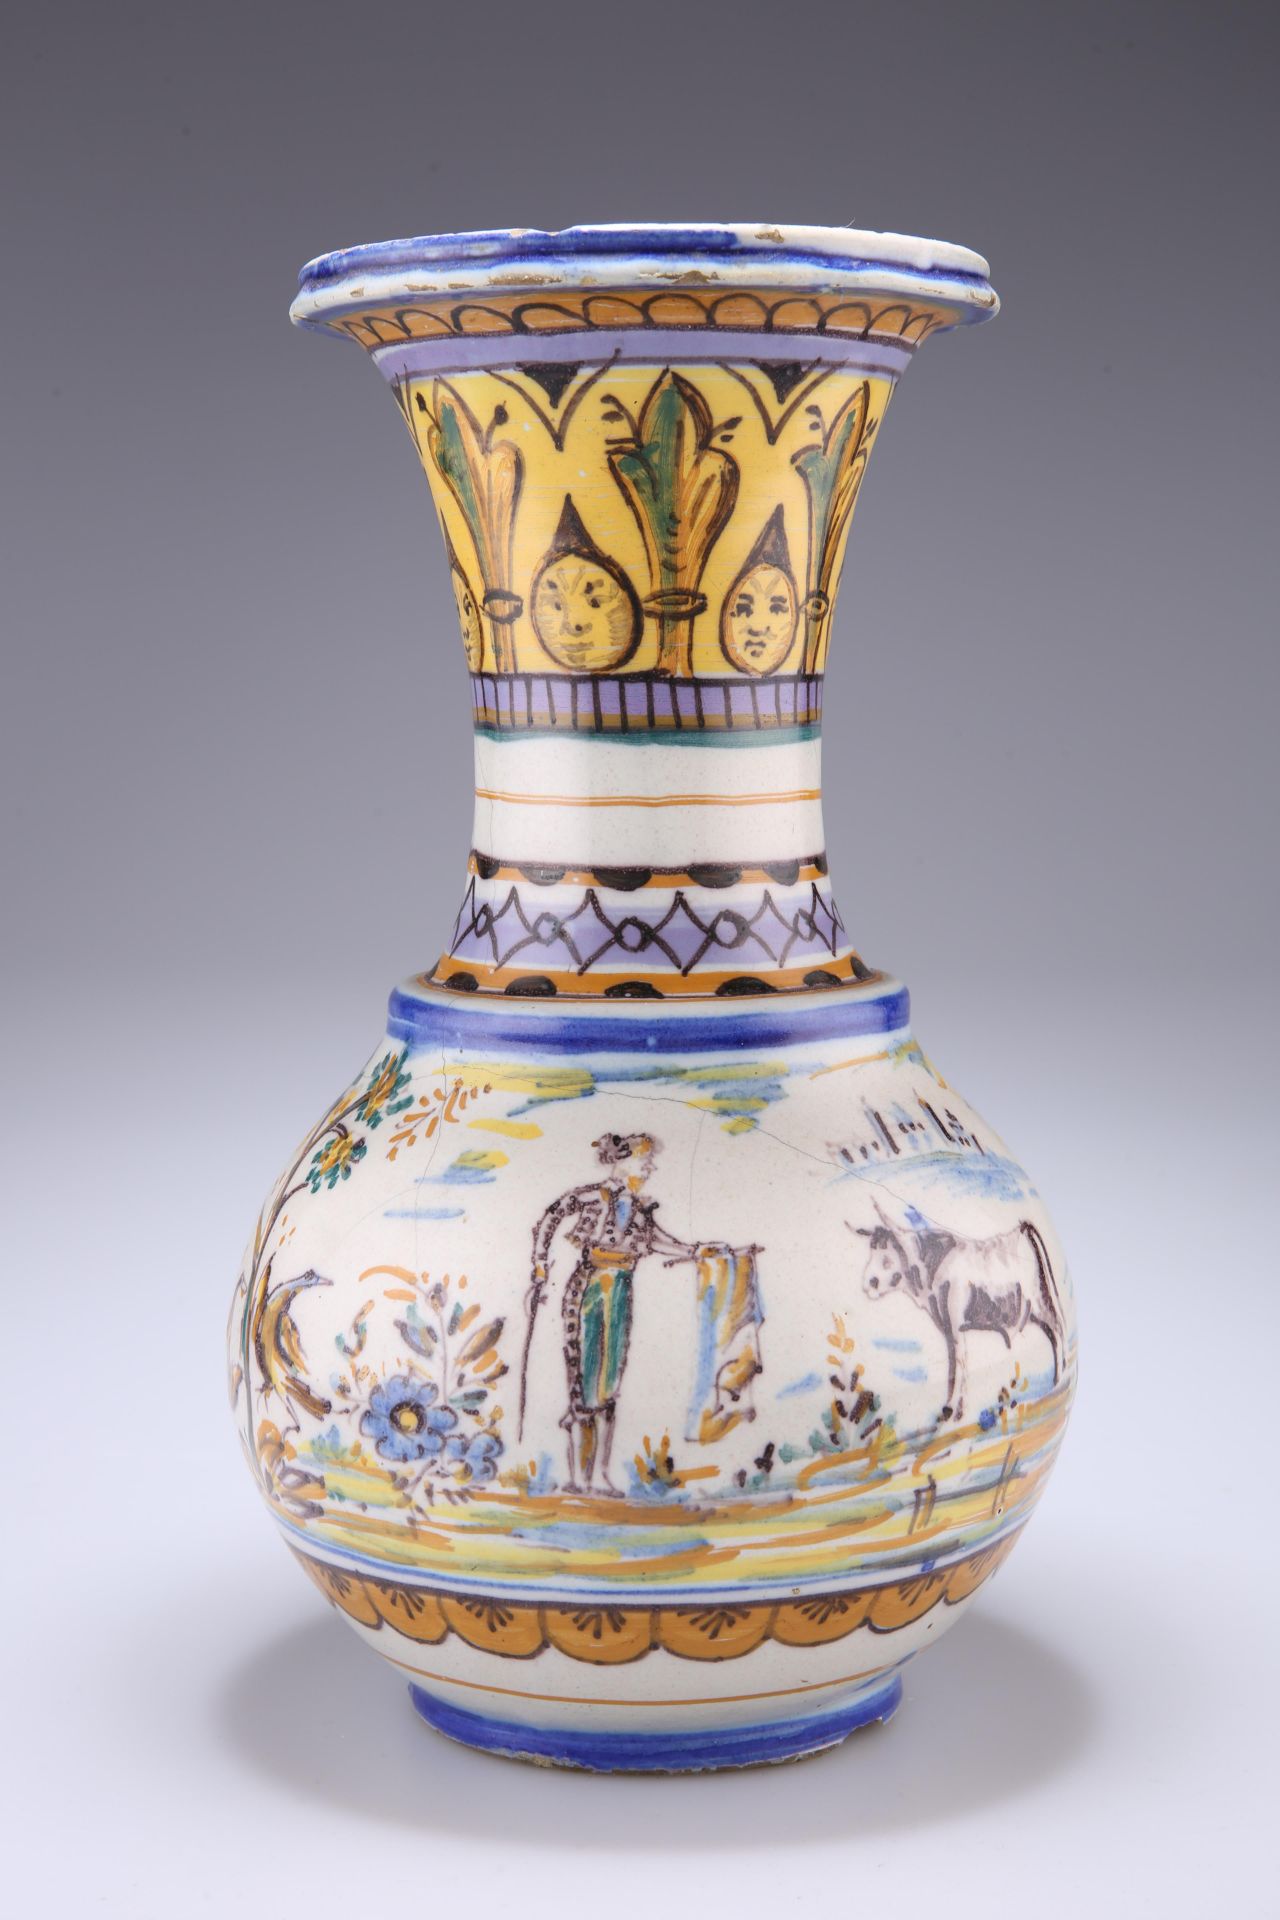 A SPANISH FAIENCE VASE, the globular body with large trumpet neck, painted with a bull fighting